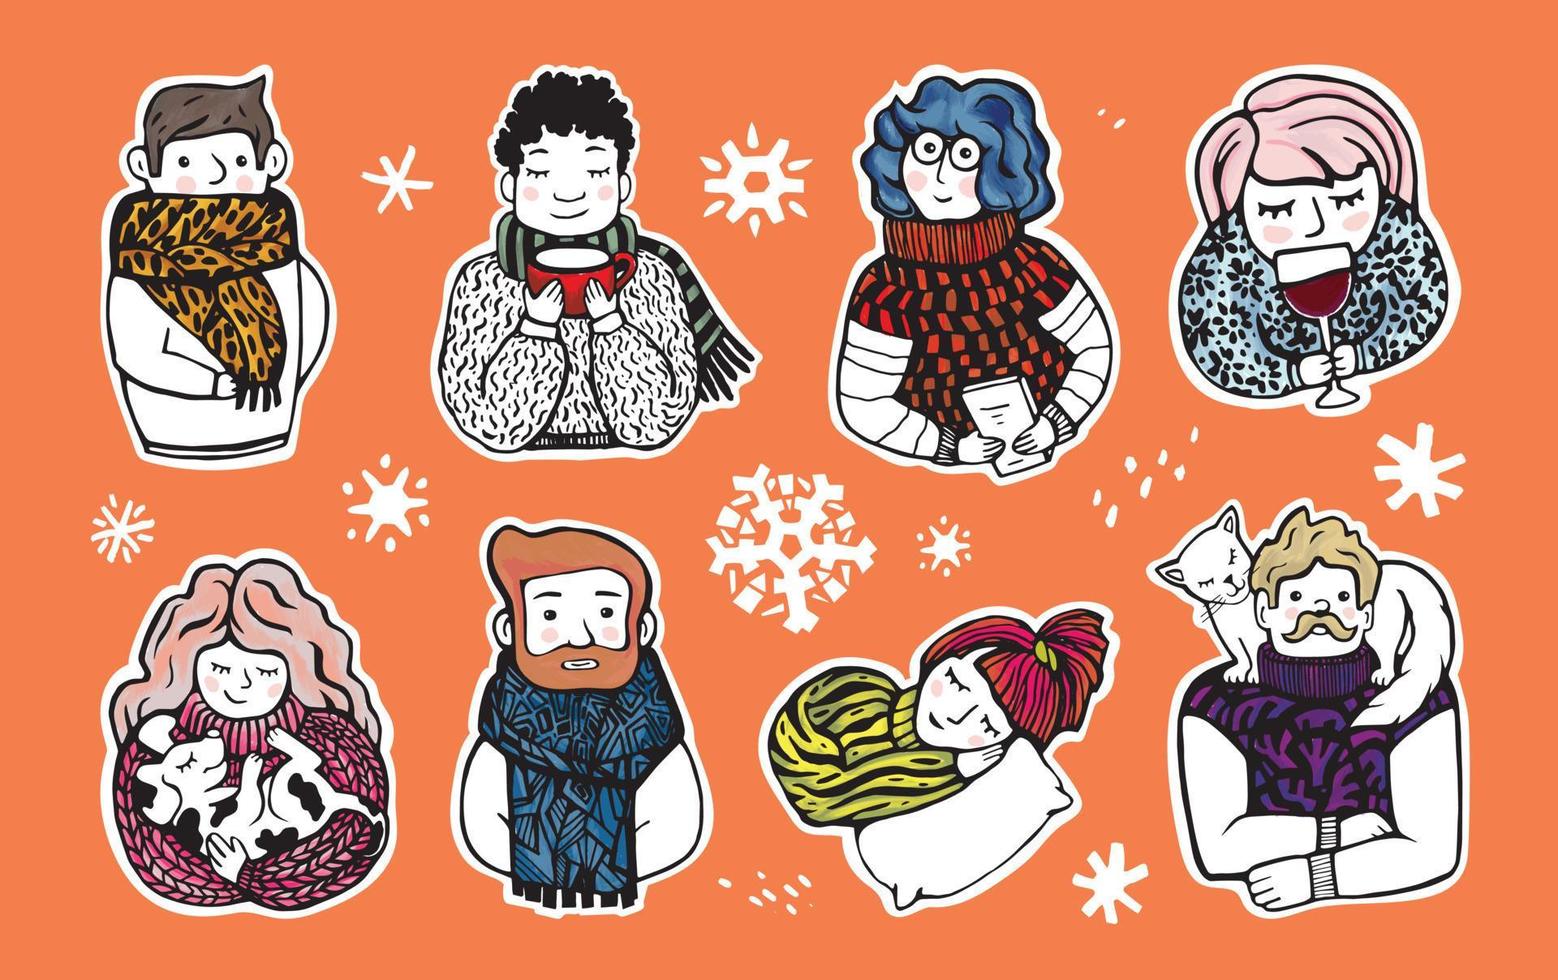 Snow Much Fun -Cardstock Large Stickers